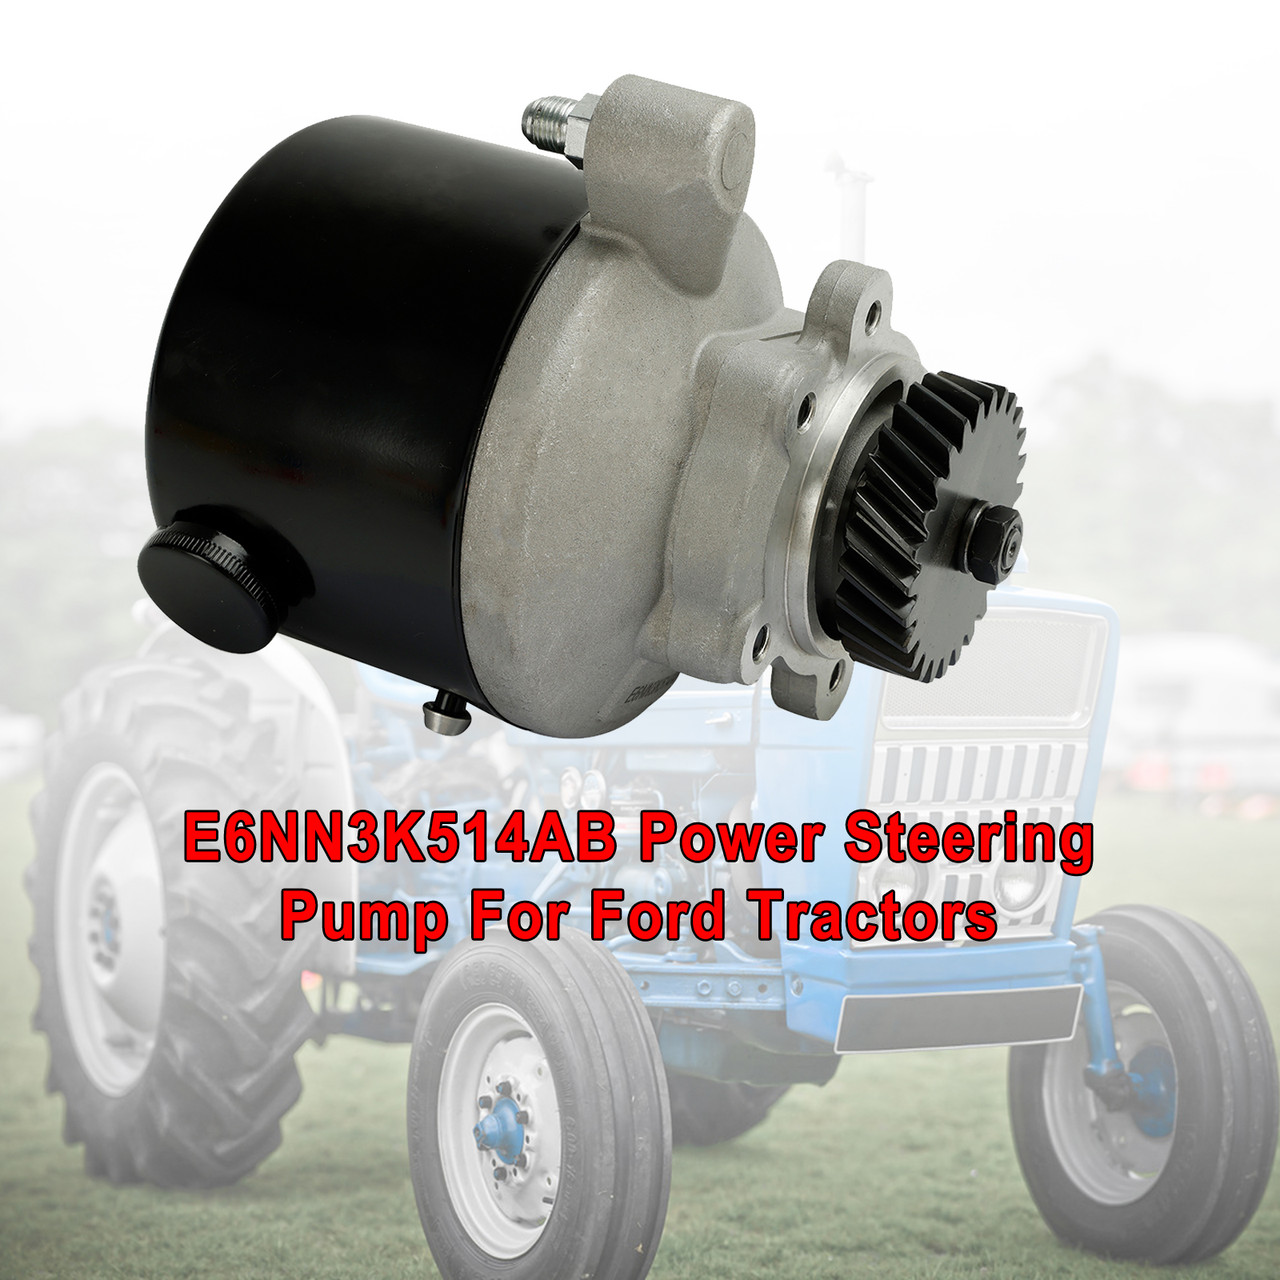 E6NN3K514AB Power Steering Pump For Ford Tractors 5110 5610 6610 7610